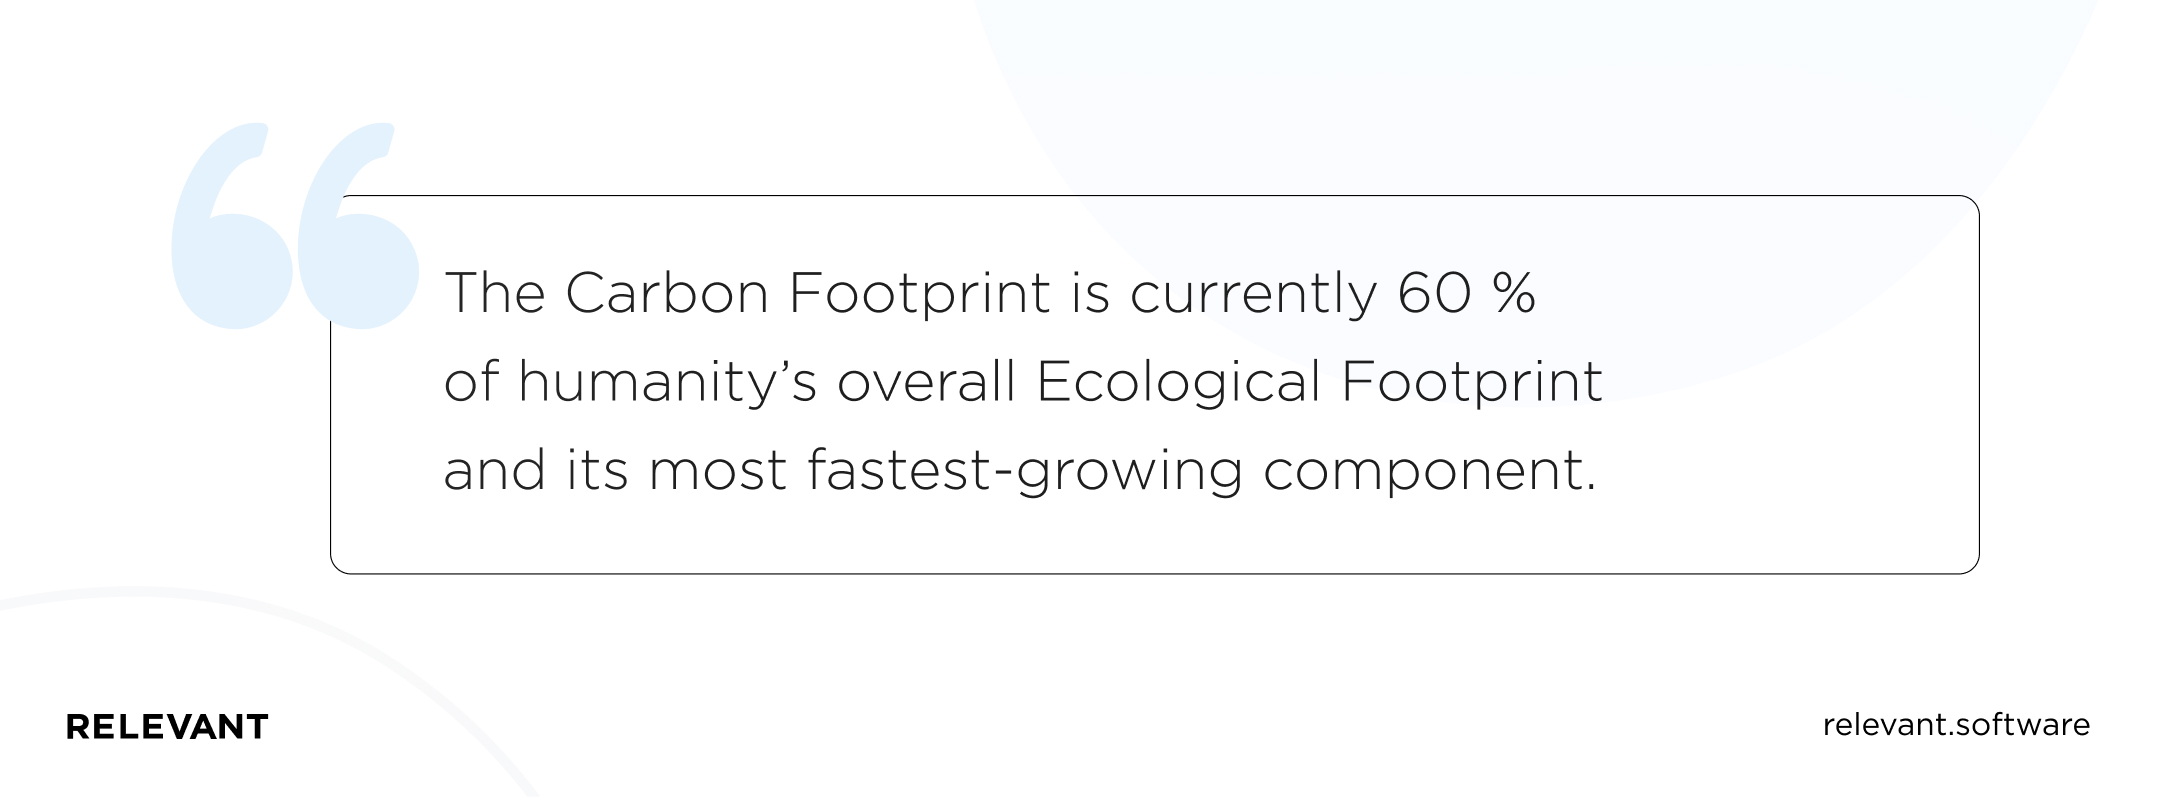 The Carbon Footprint is currently 60 % of humanity’s overall Ecological Footprint and its most fastest-growing component.